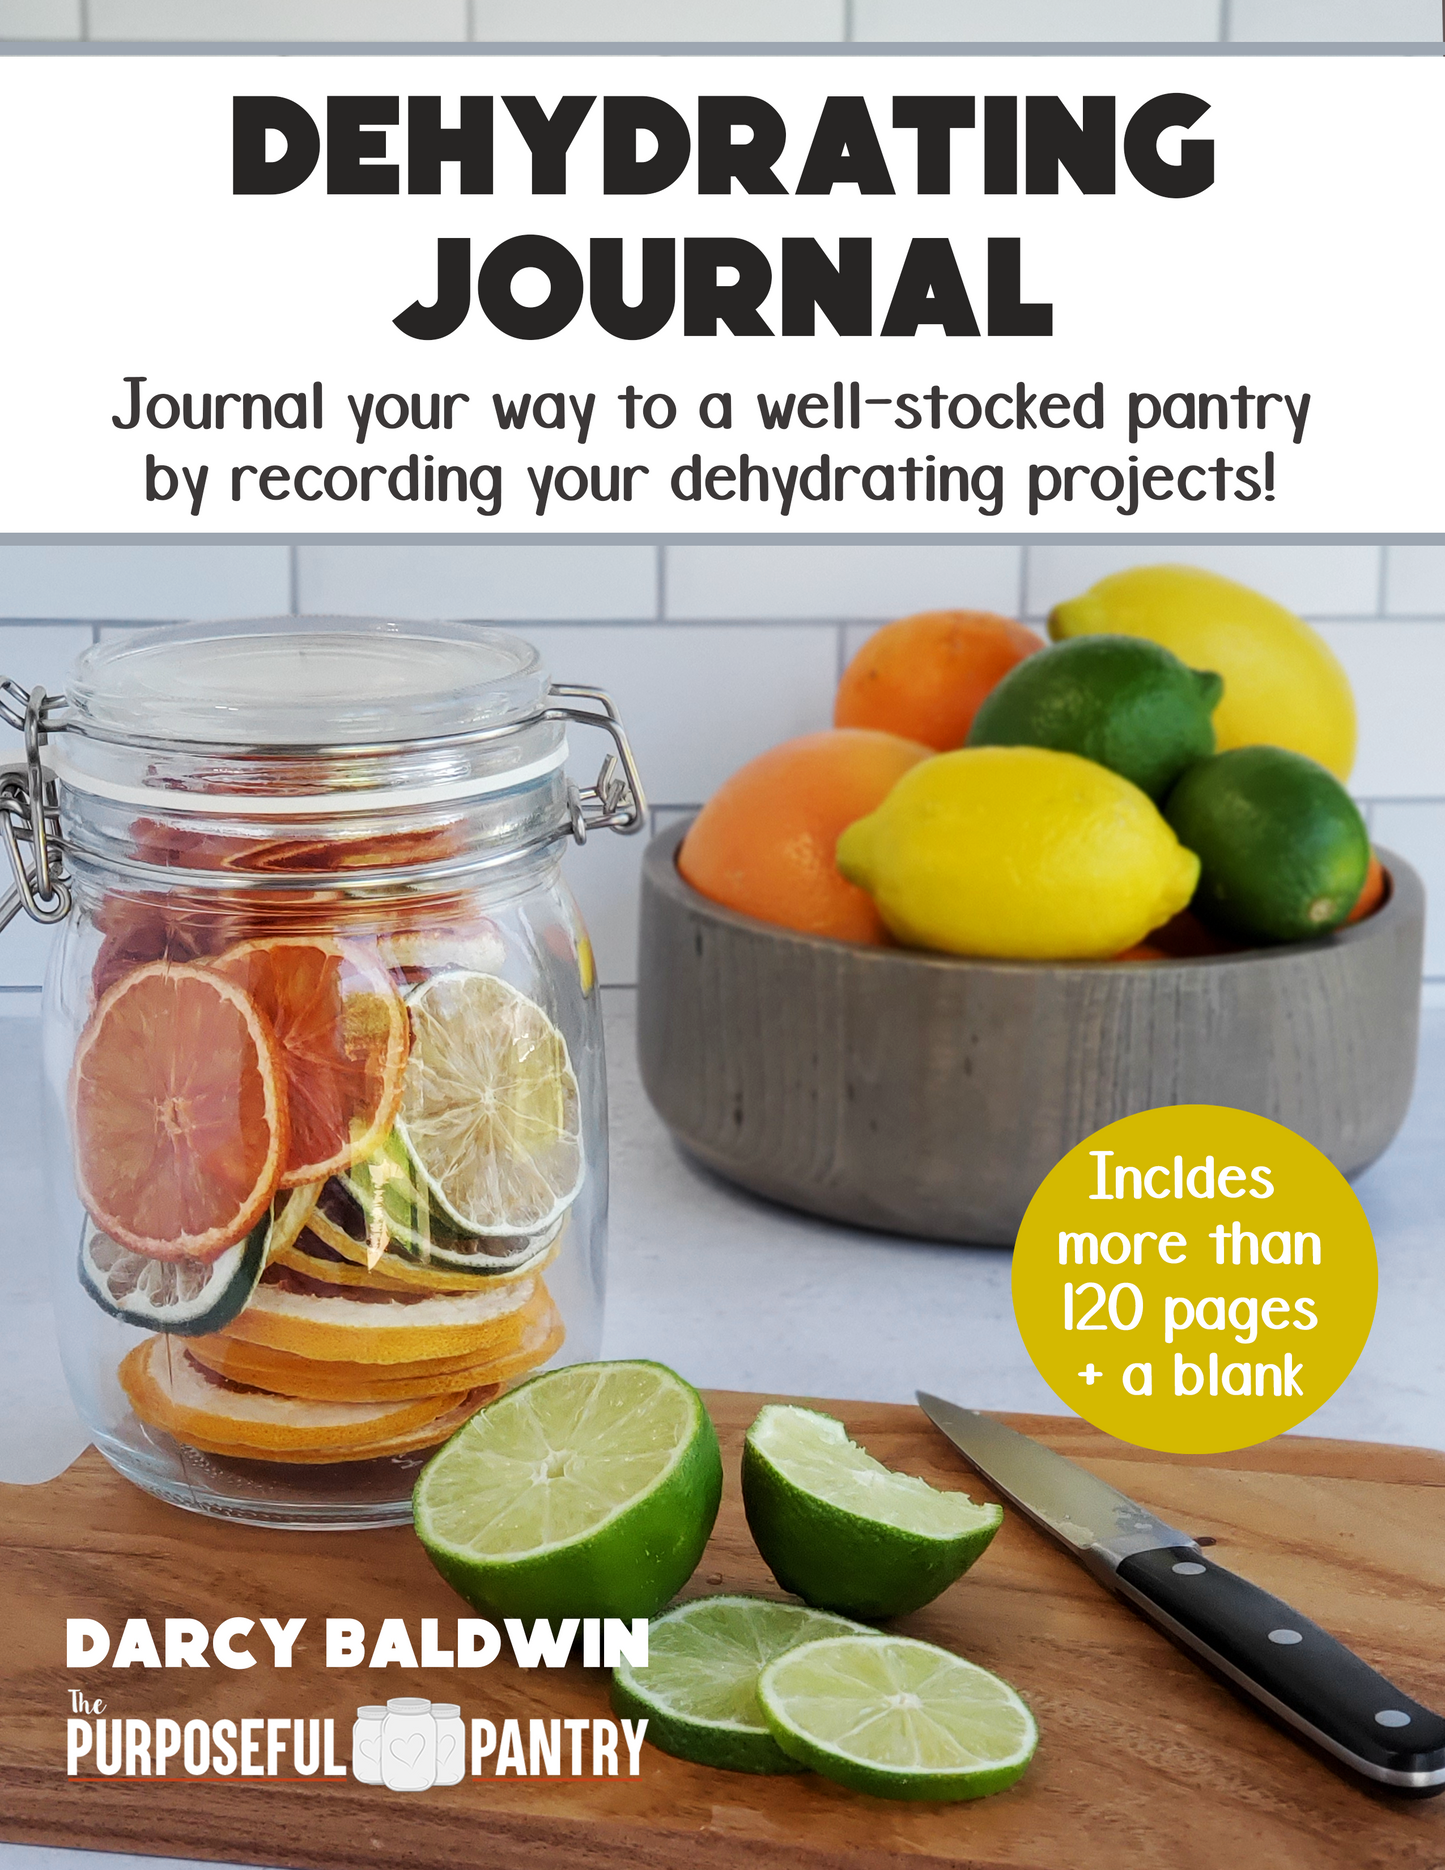 A Dehydrating Journal Paperback with lemons and oranges, by The Purposeful Pantry.